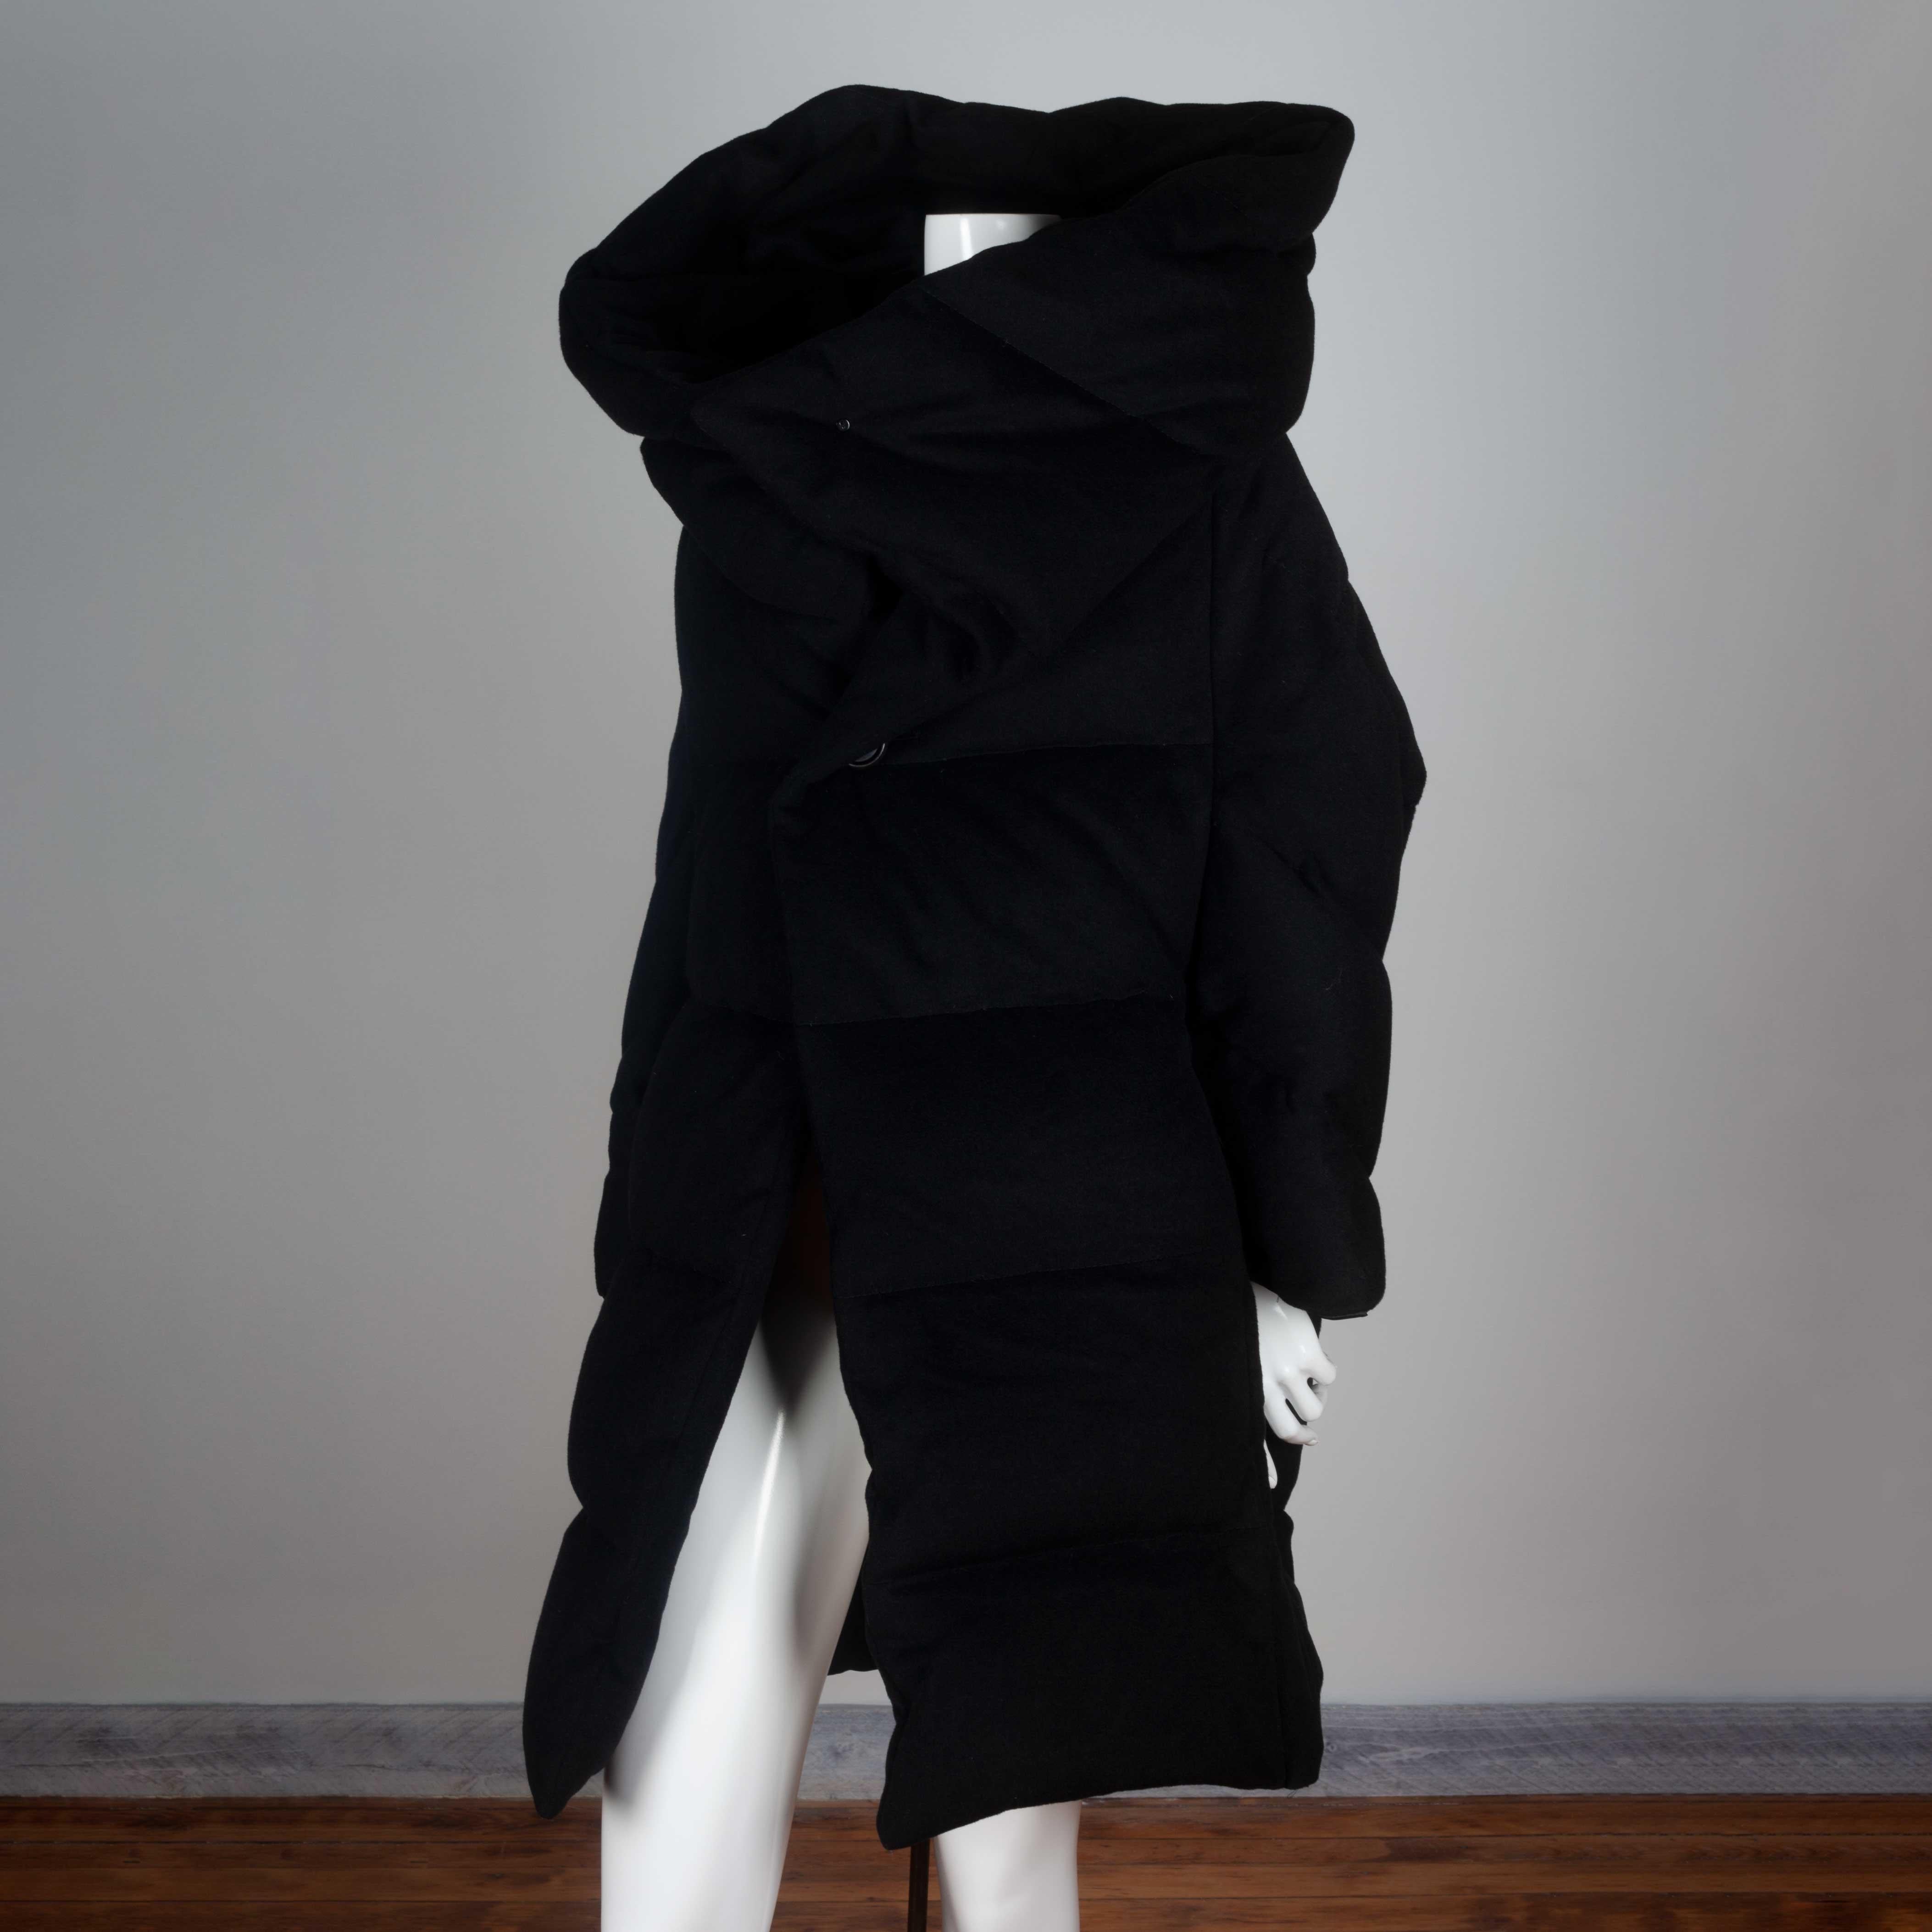 Junya Watanabe Comme des Garçons vintage archive 2004 warm winter coat from Japan in black cashmere, wool and down feather. Deconstructed style with large, dramatic collar that can be worn folded over the shoulders or up around the neck and head. A